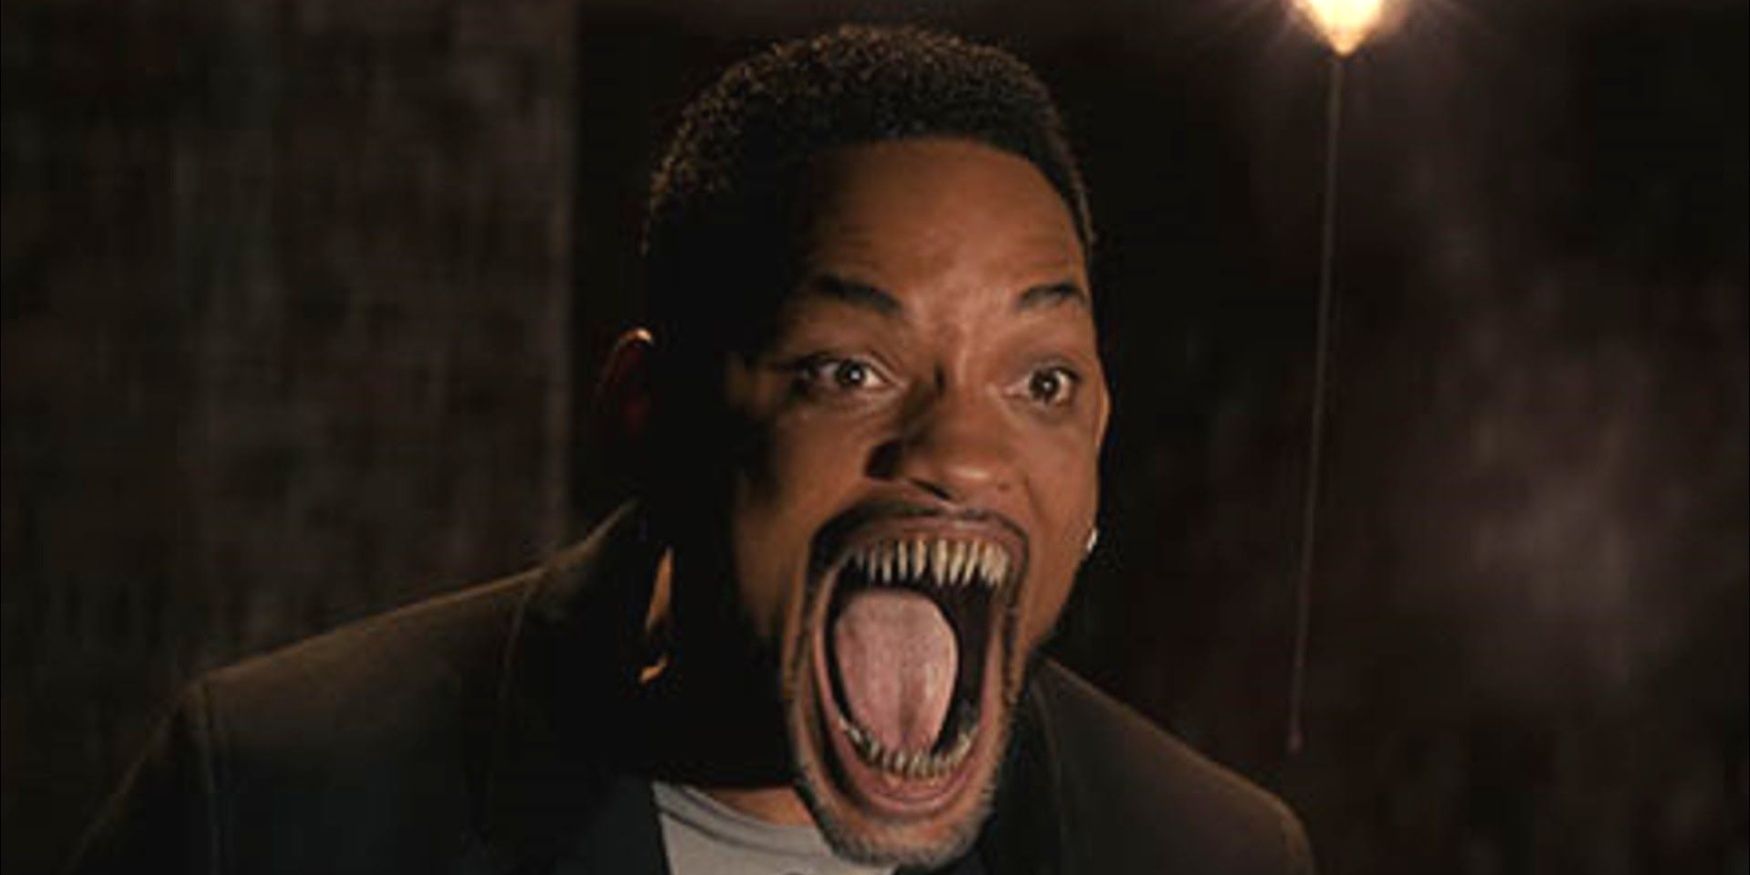 Will Smiths 10 Worst Roles (According to Rotten Tomatoes)